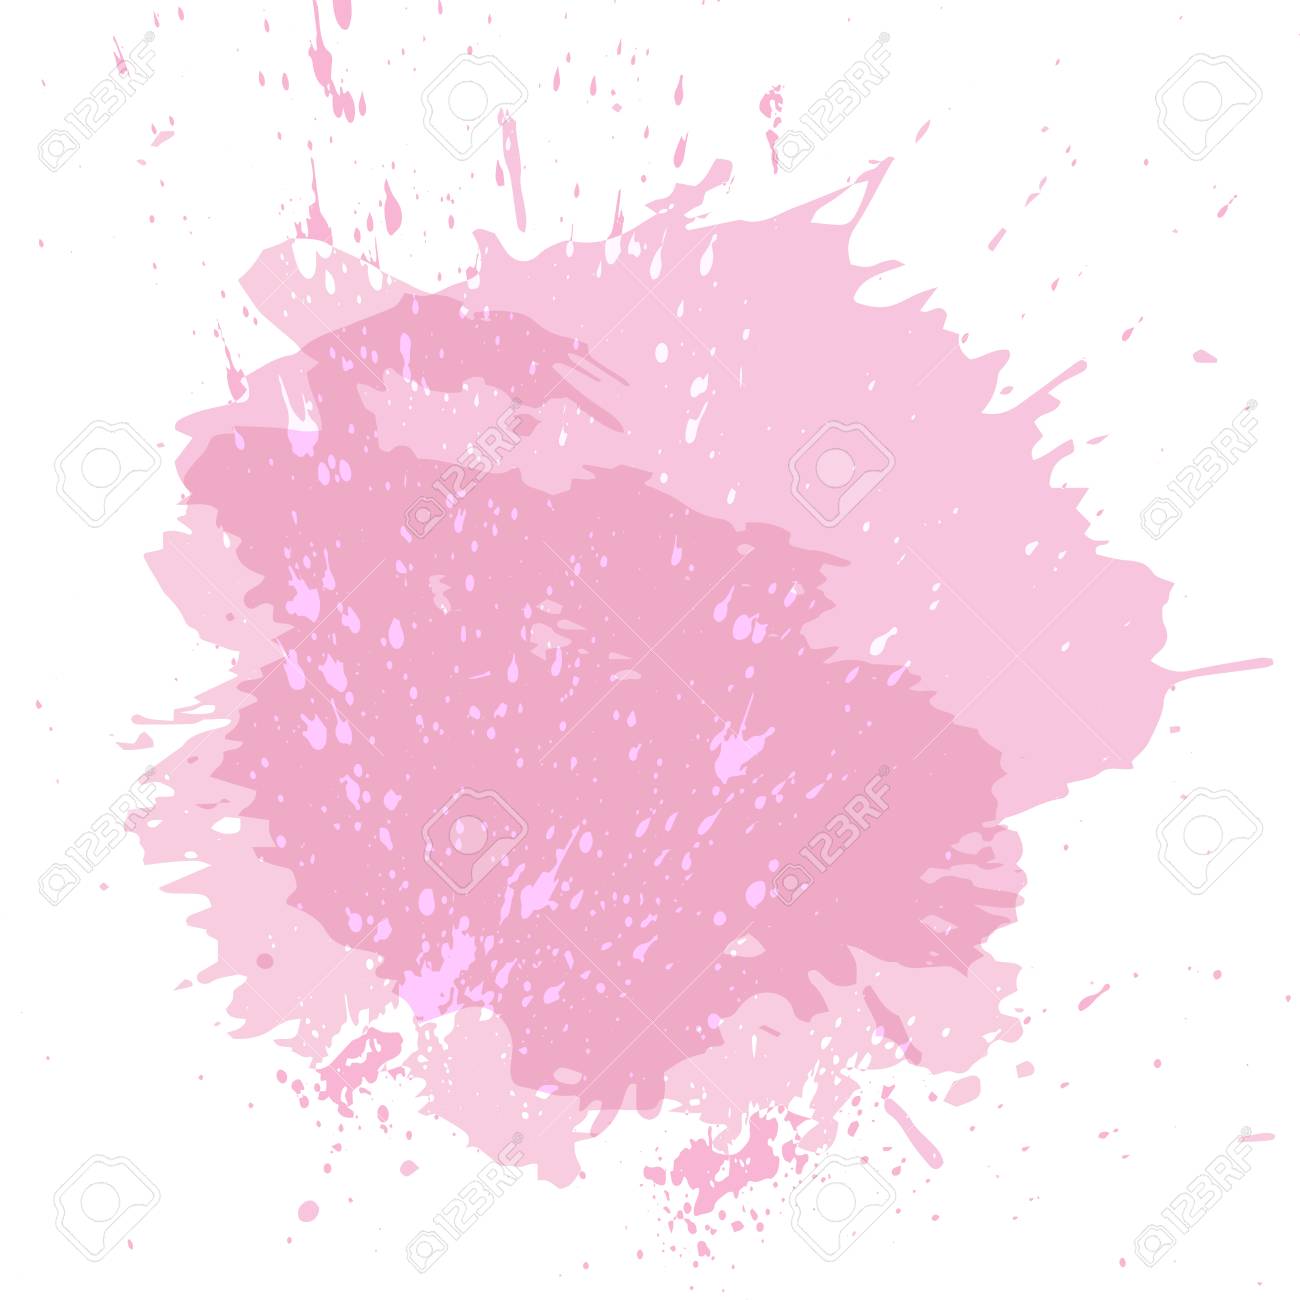 Abstract Watercolor Spot Background Splash Texture